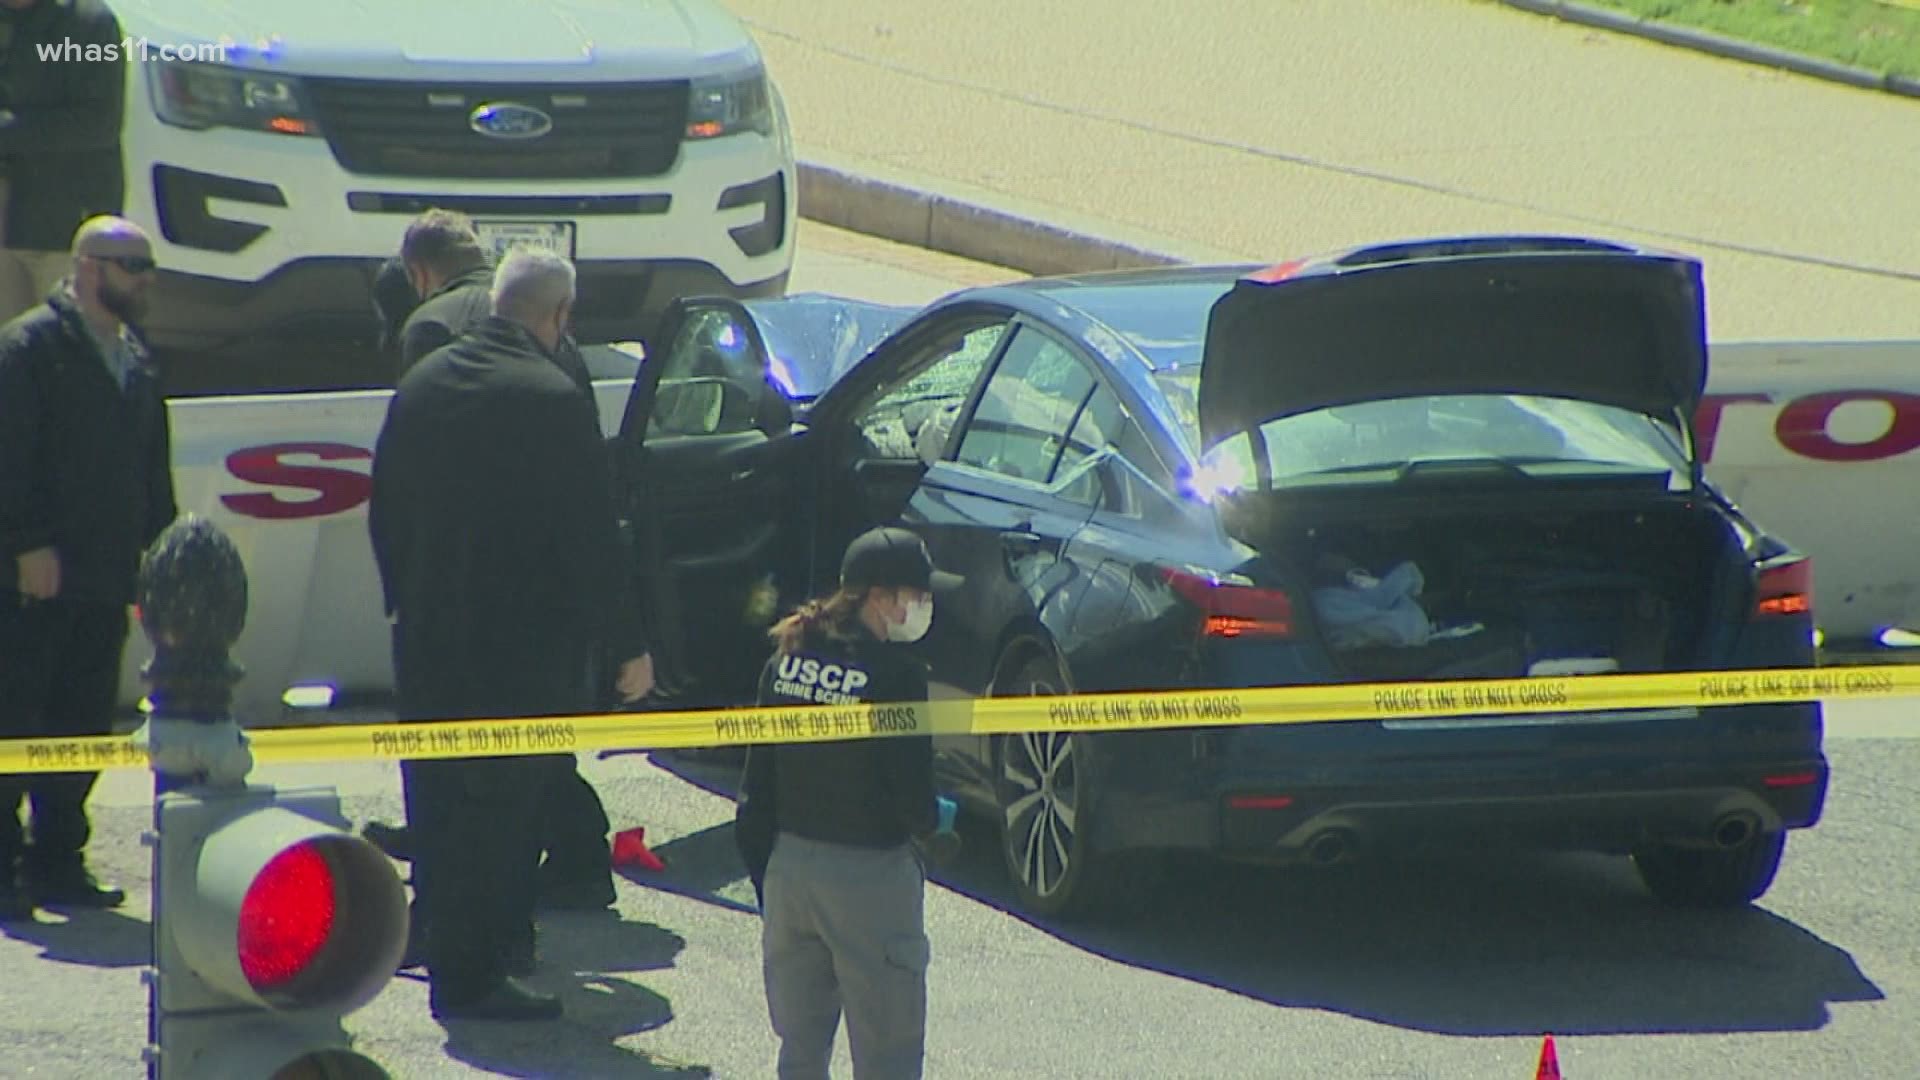 A Capitol Police officer is dead and another is injured after authorities say a man drove his car into a security checkpoint. The suspect was fatally shot by police.